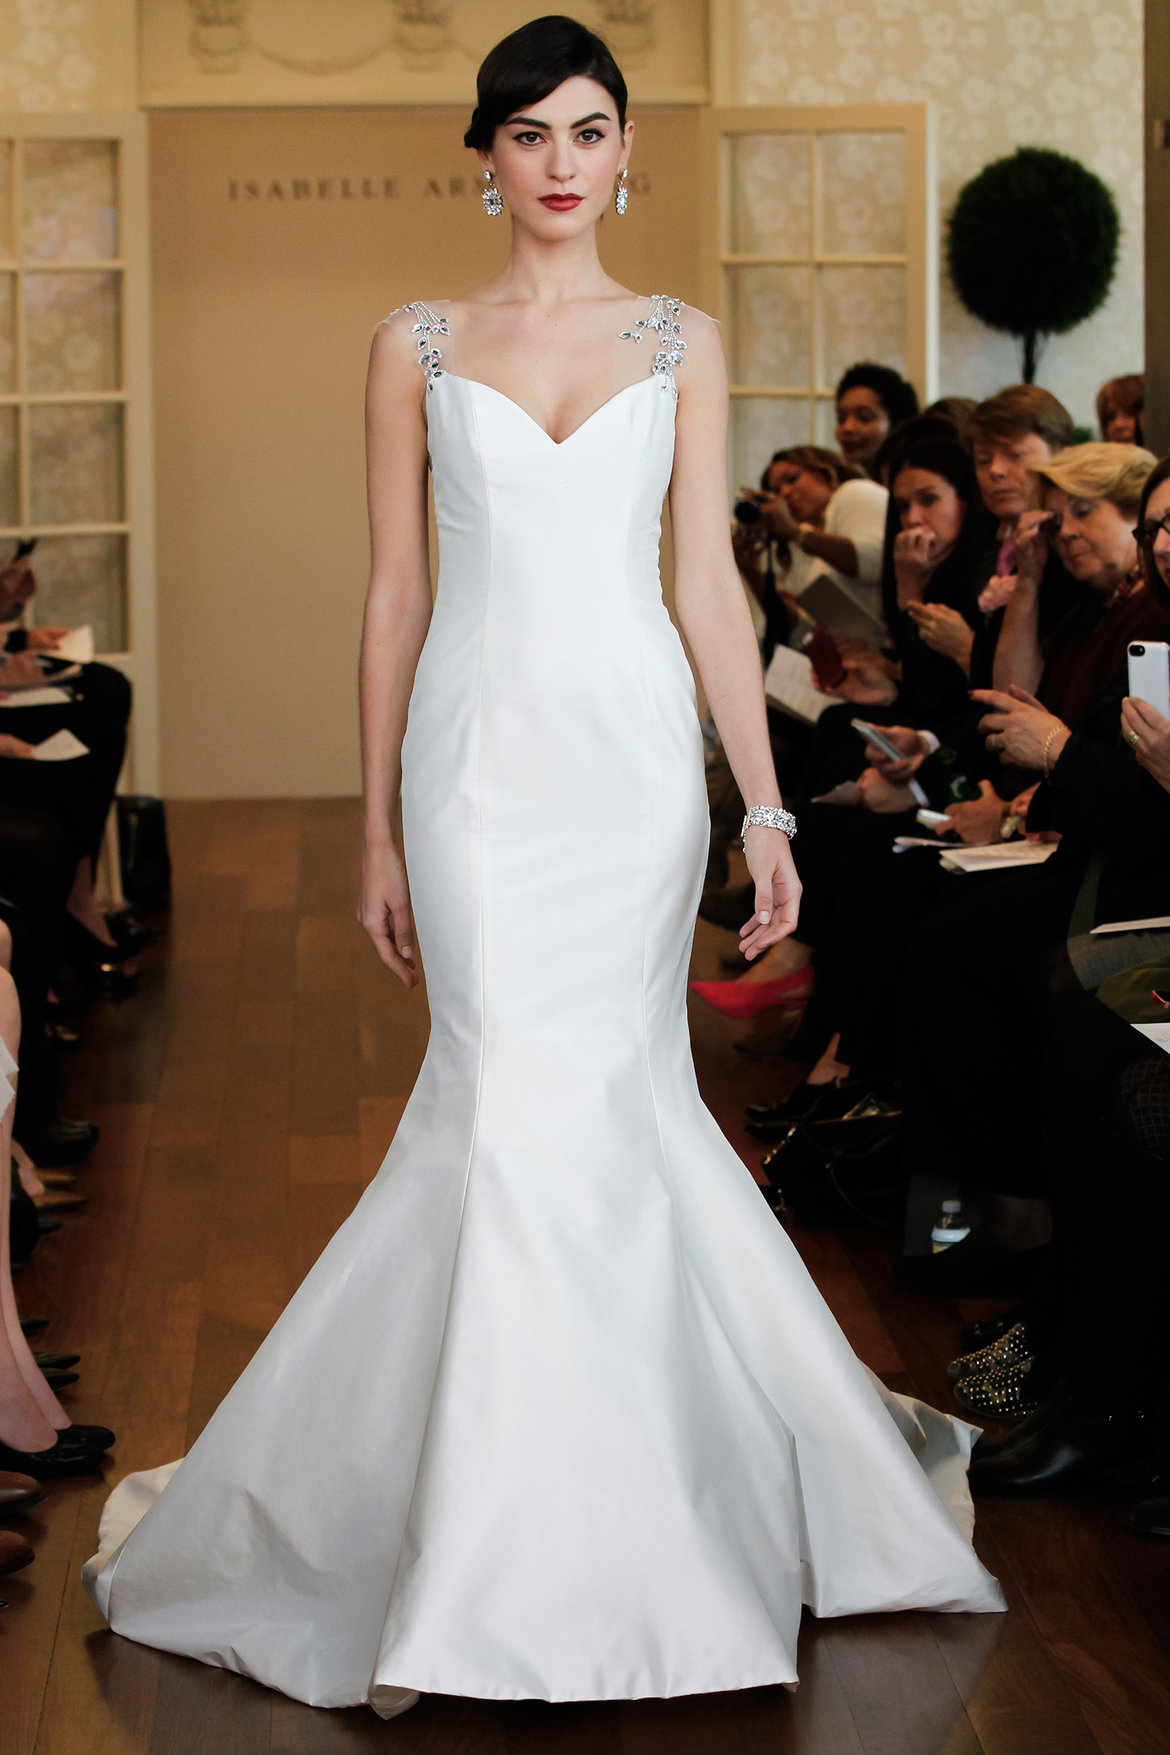 isabelle armstrong mermaid wedding gown